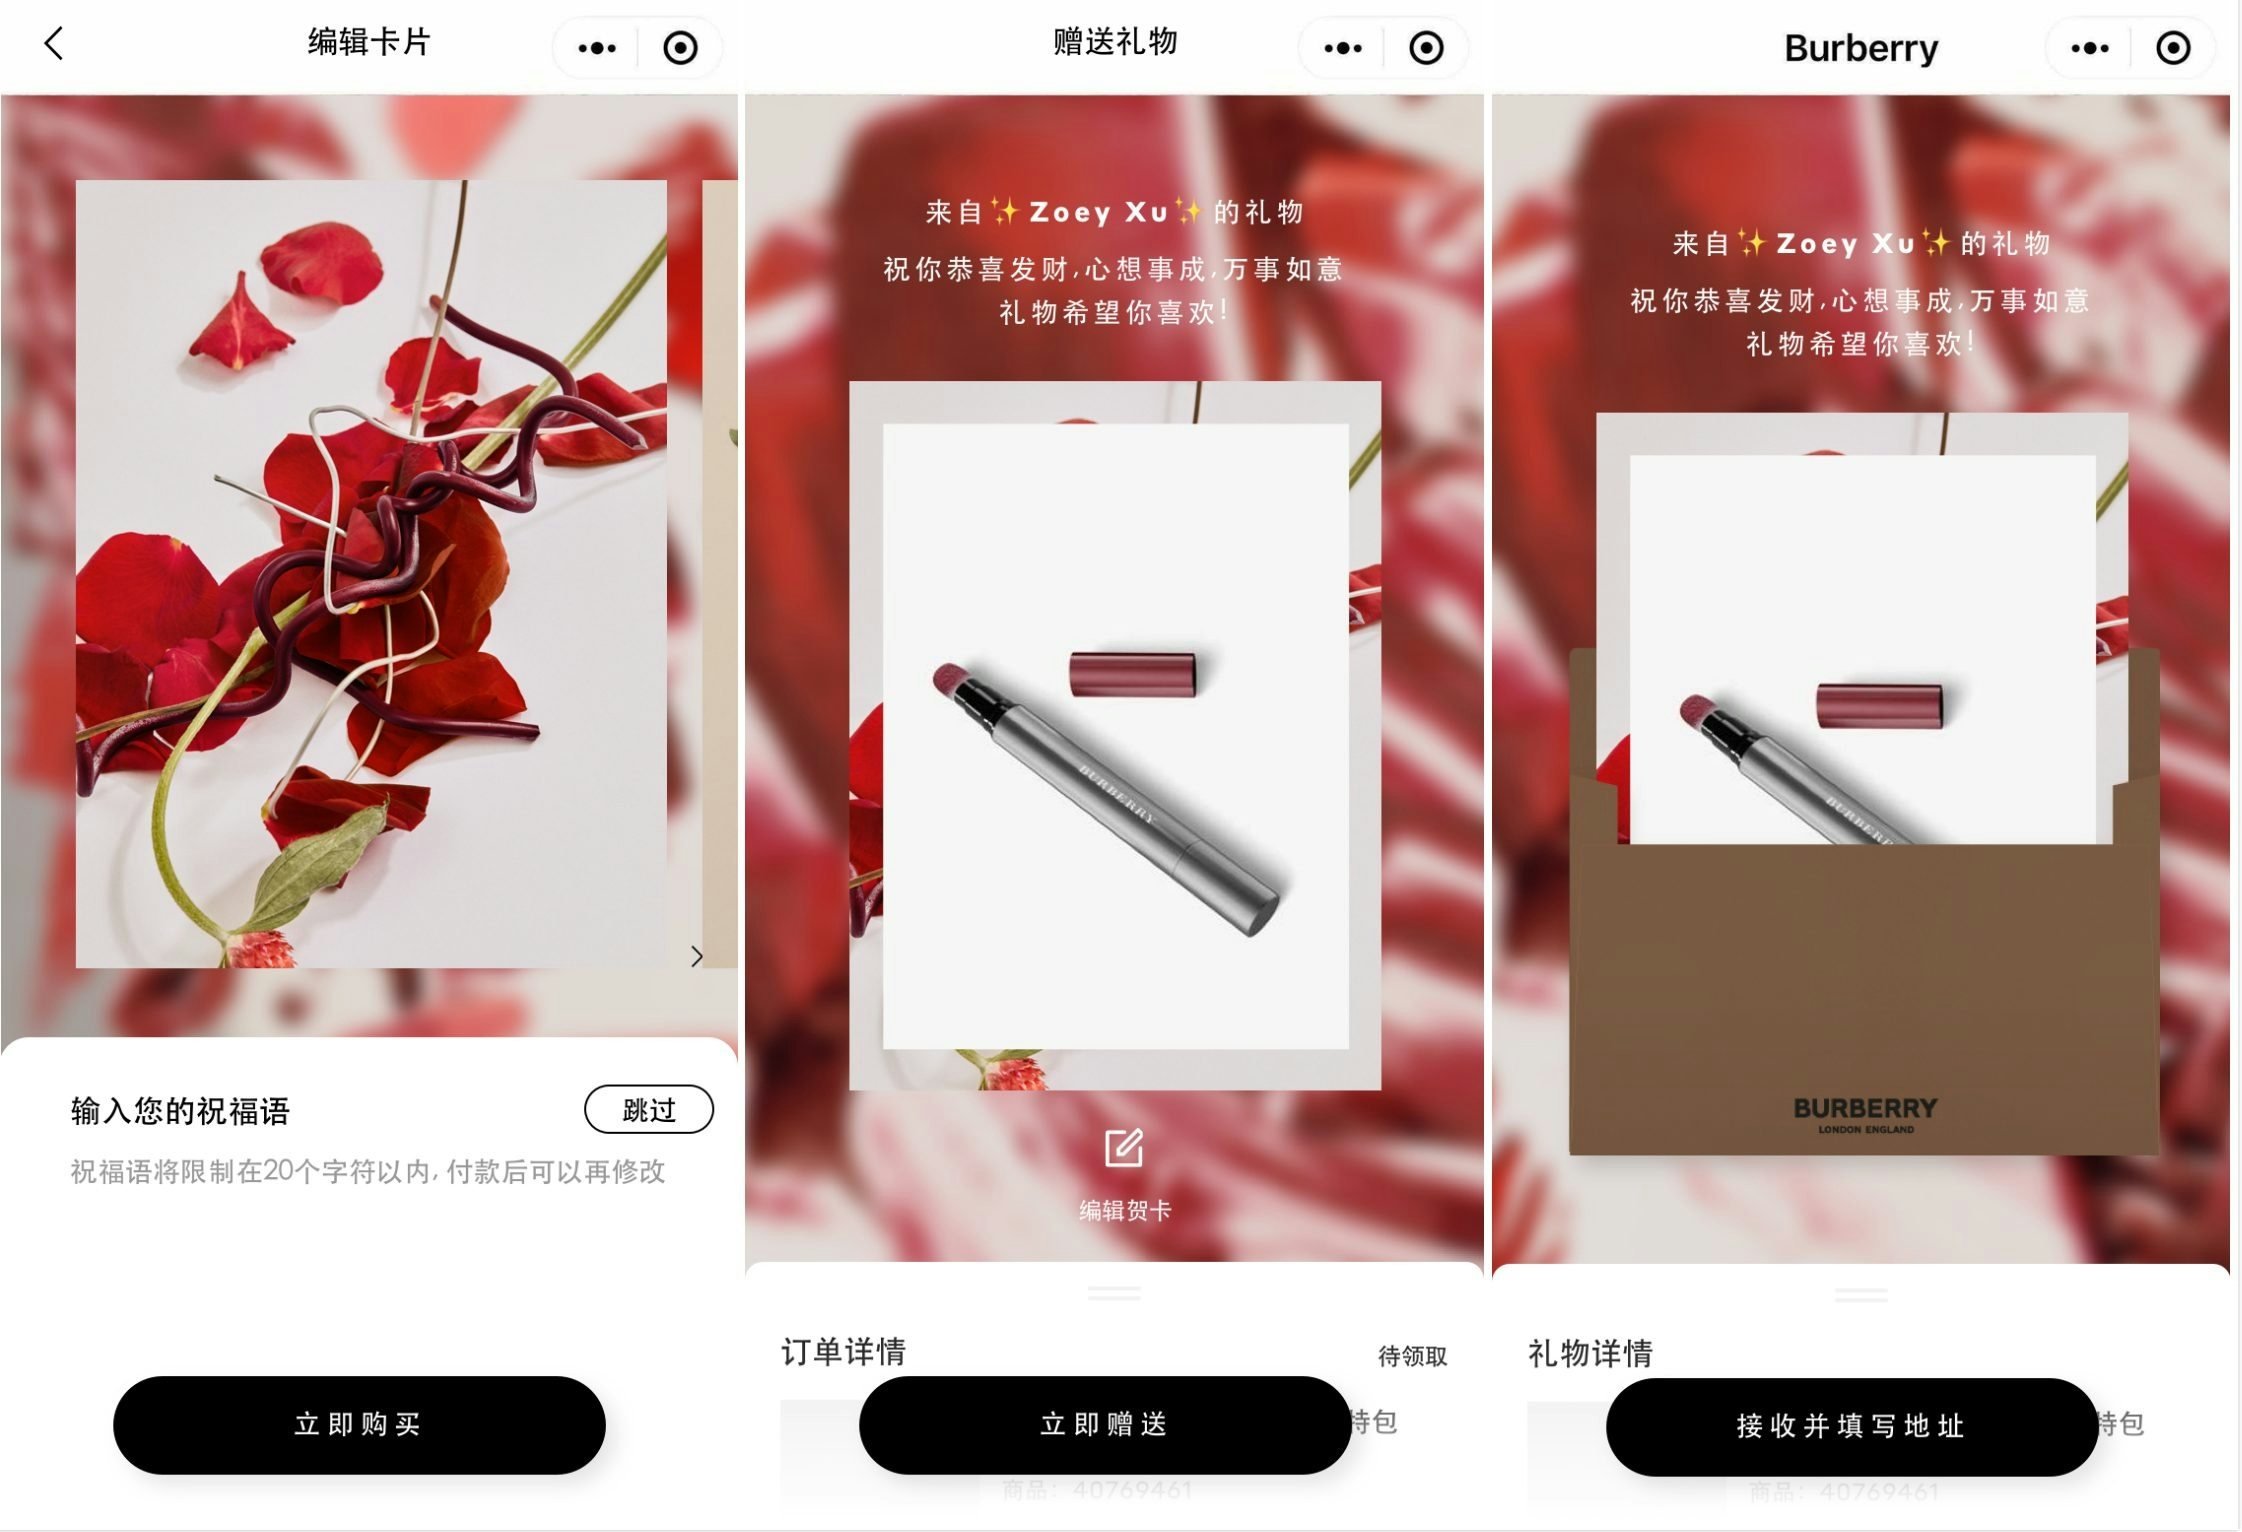 Burberry's 520 Love Day campaign on WeChat. Courtesy photo